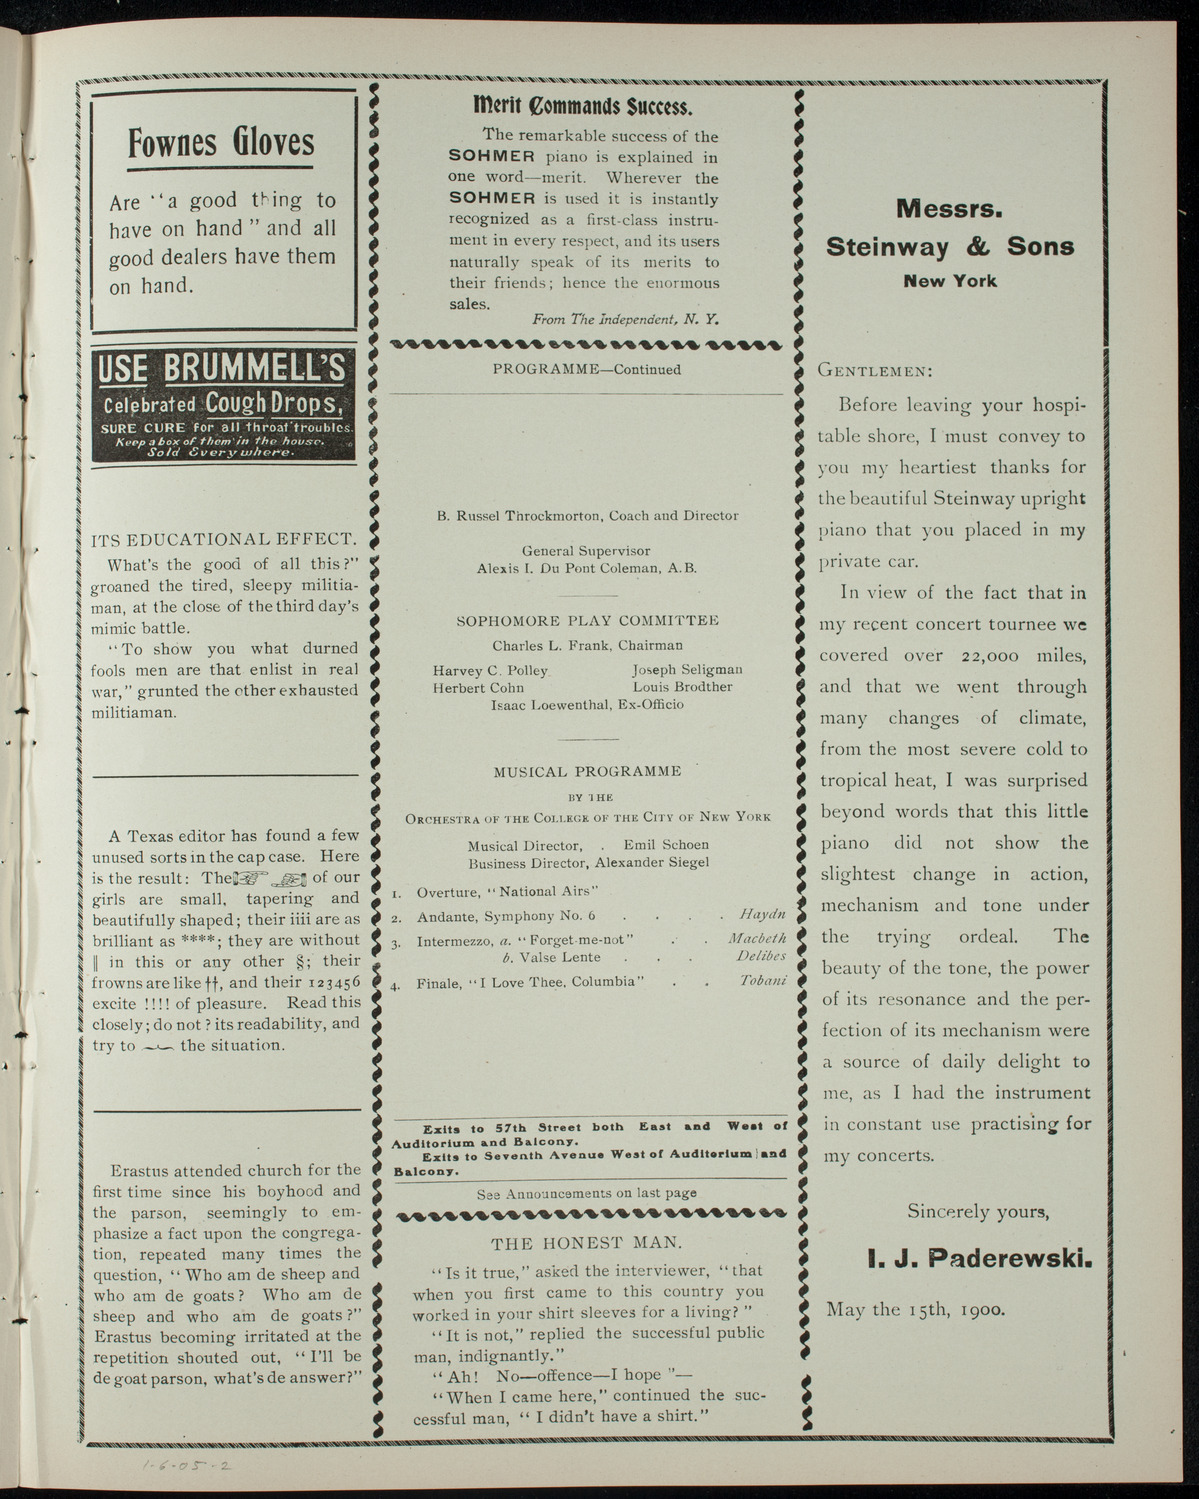 College of the City of New York Sophomore Play, January 6, 1905, program page 3